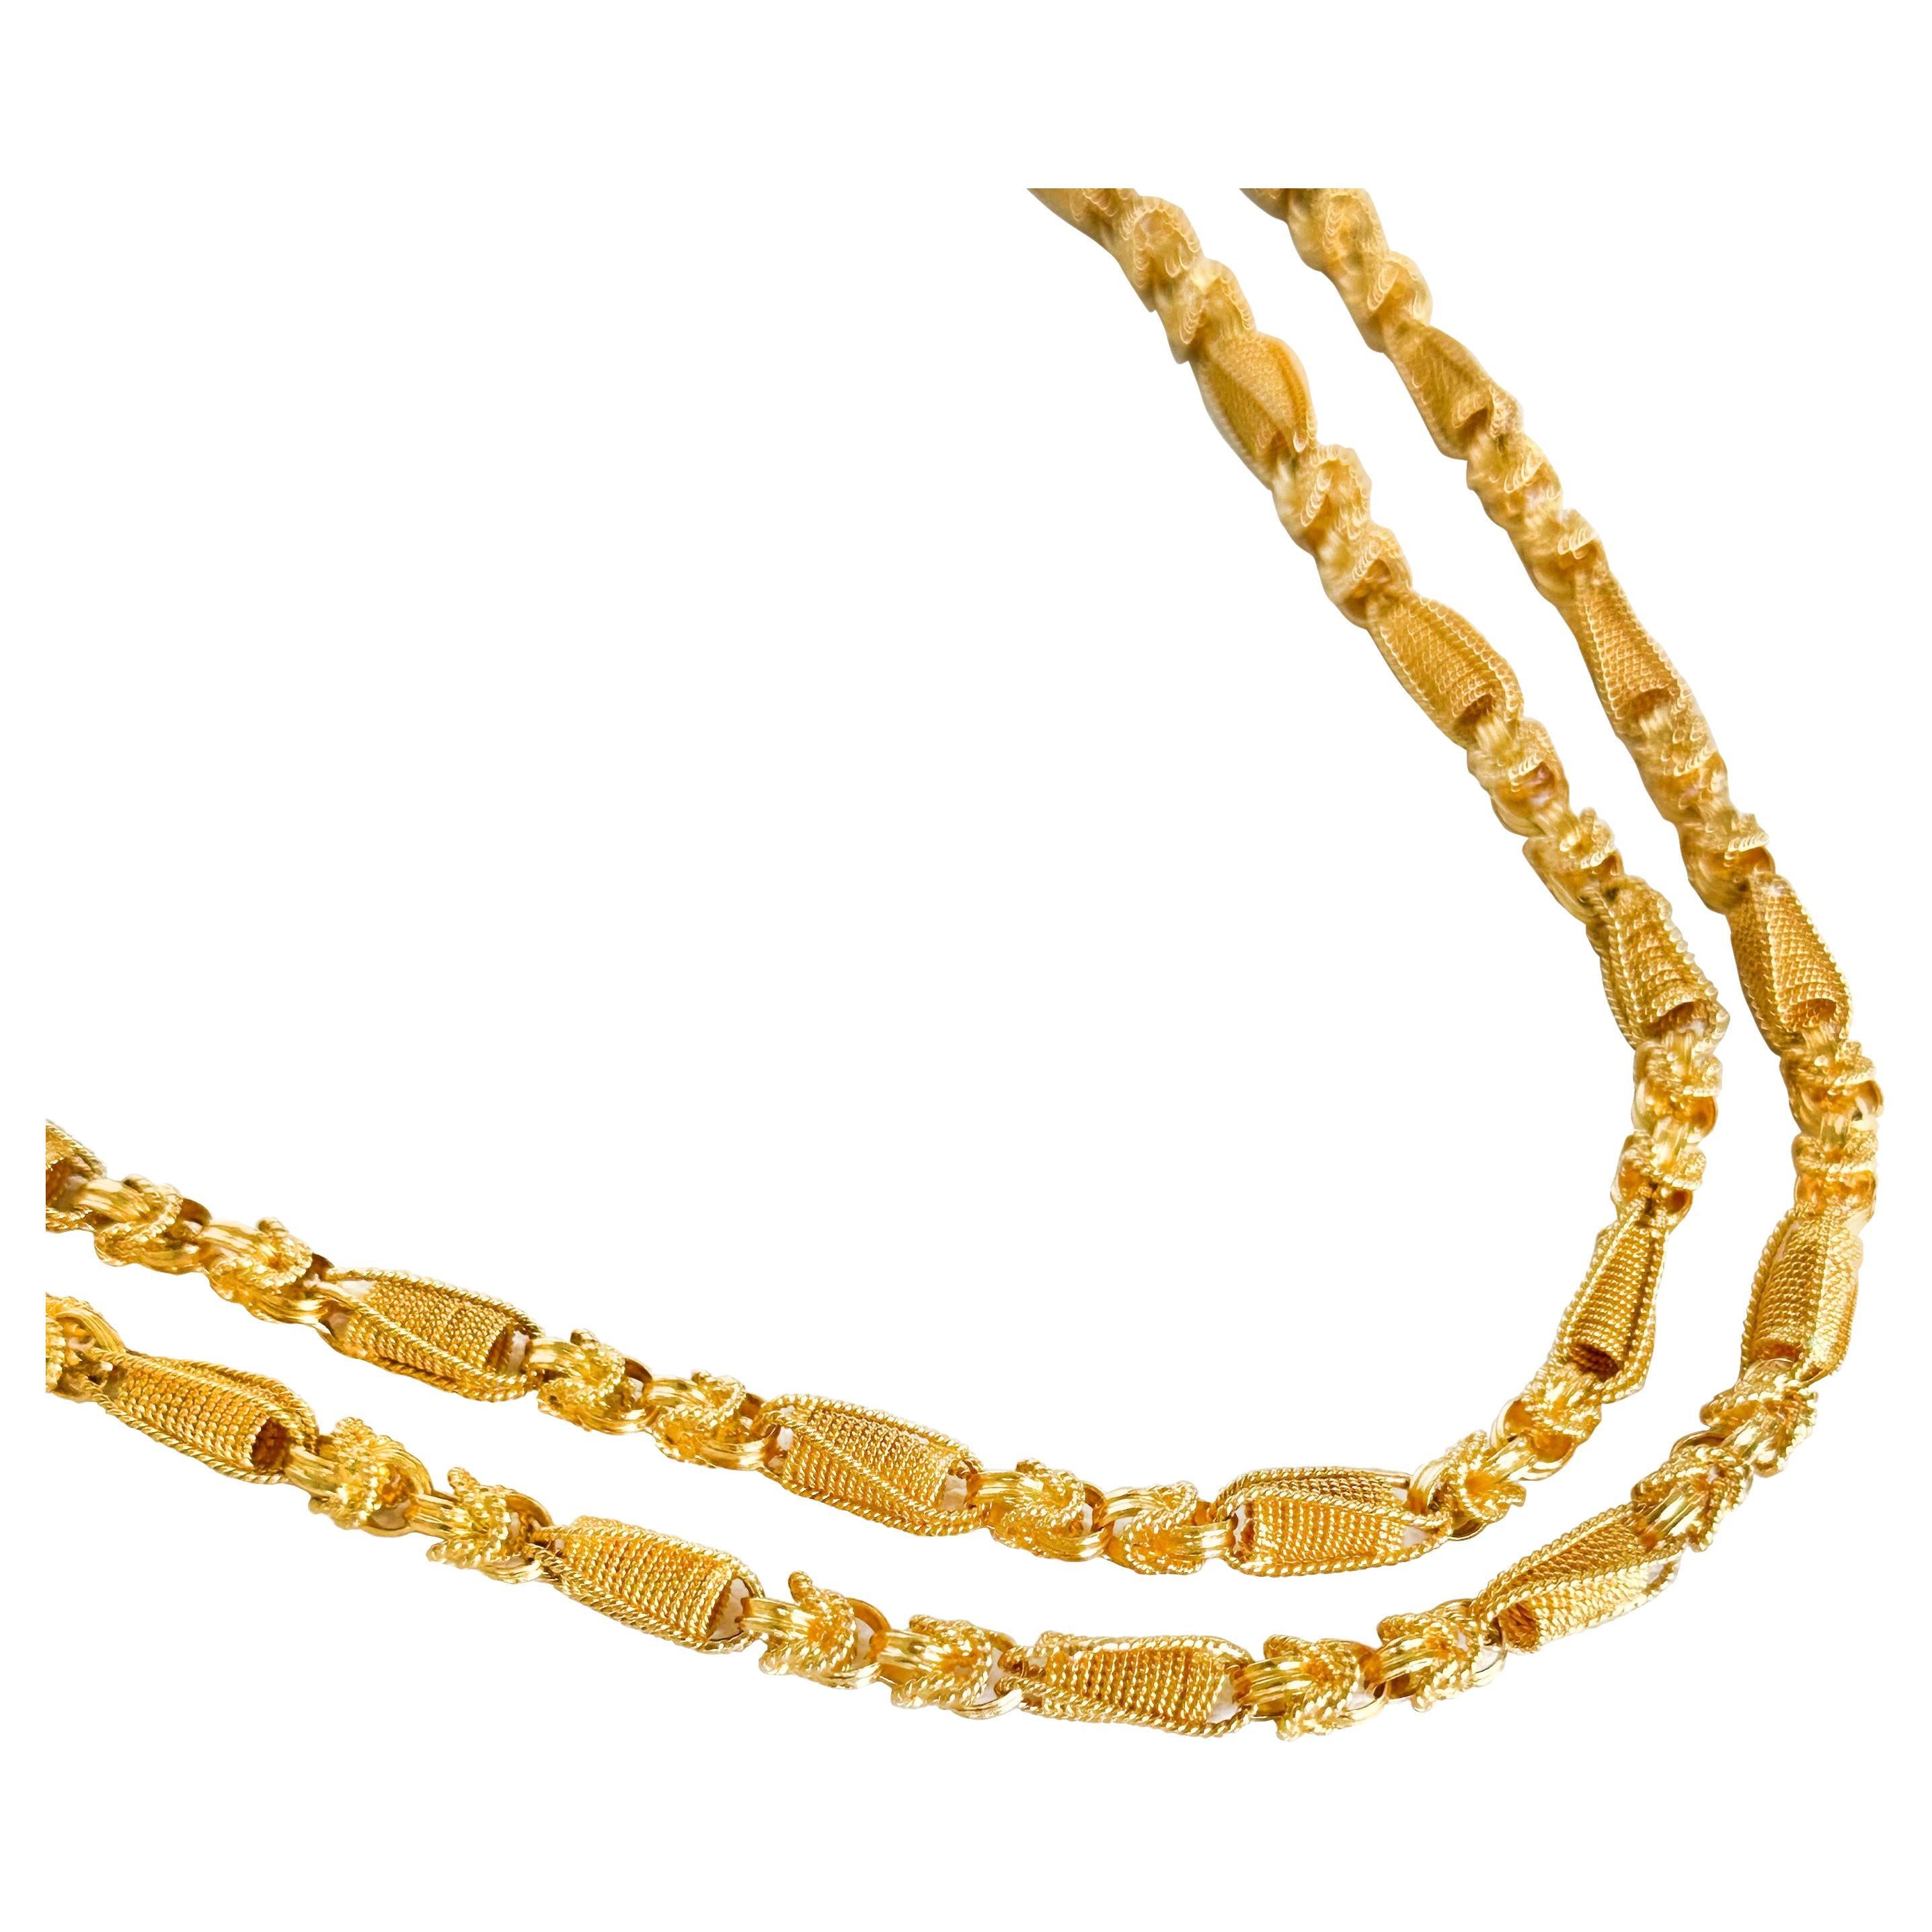 24K Yellow Gold Vintage Handmade Late Victorian French Link Necklace. No opening clasp. 
Necklace dimensions: 39 inches/99 cm.
Long column: 11.5 mm long x 3.76 mm wide.
Fancy clasp: 6.52 mm long by 3.61 mm wide.
Total weight: 81 grams.